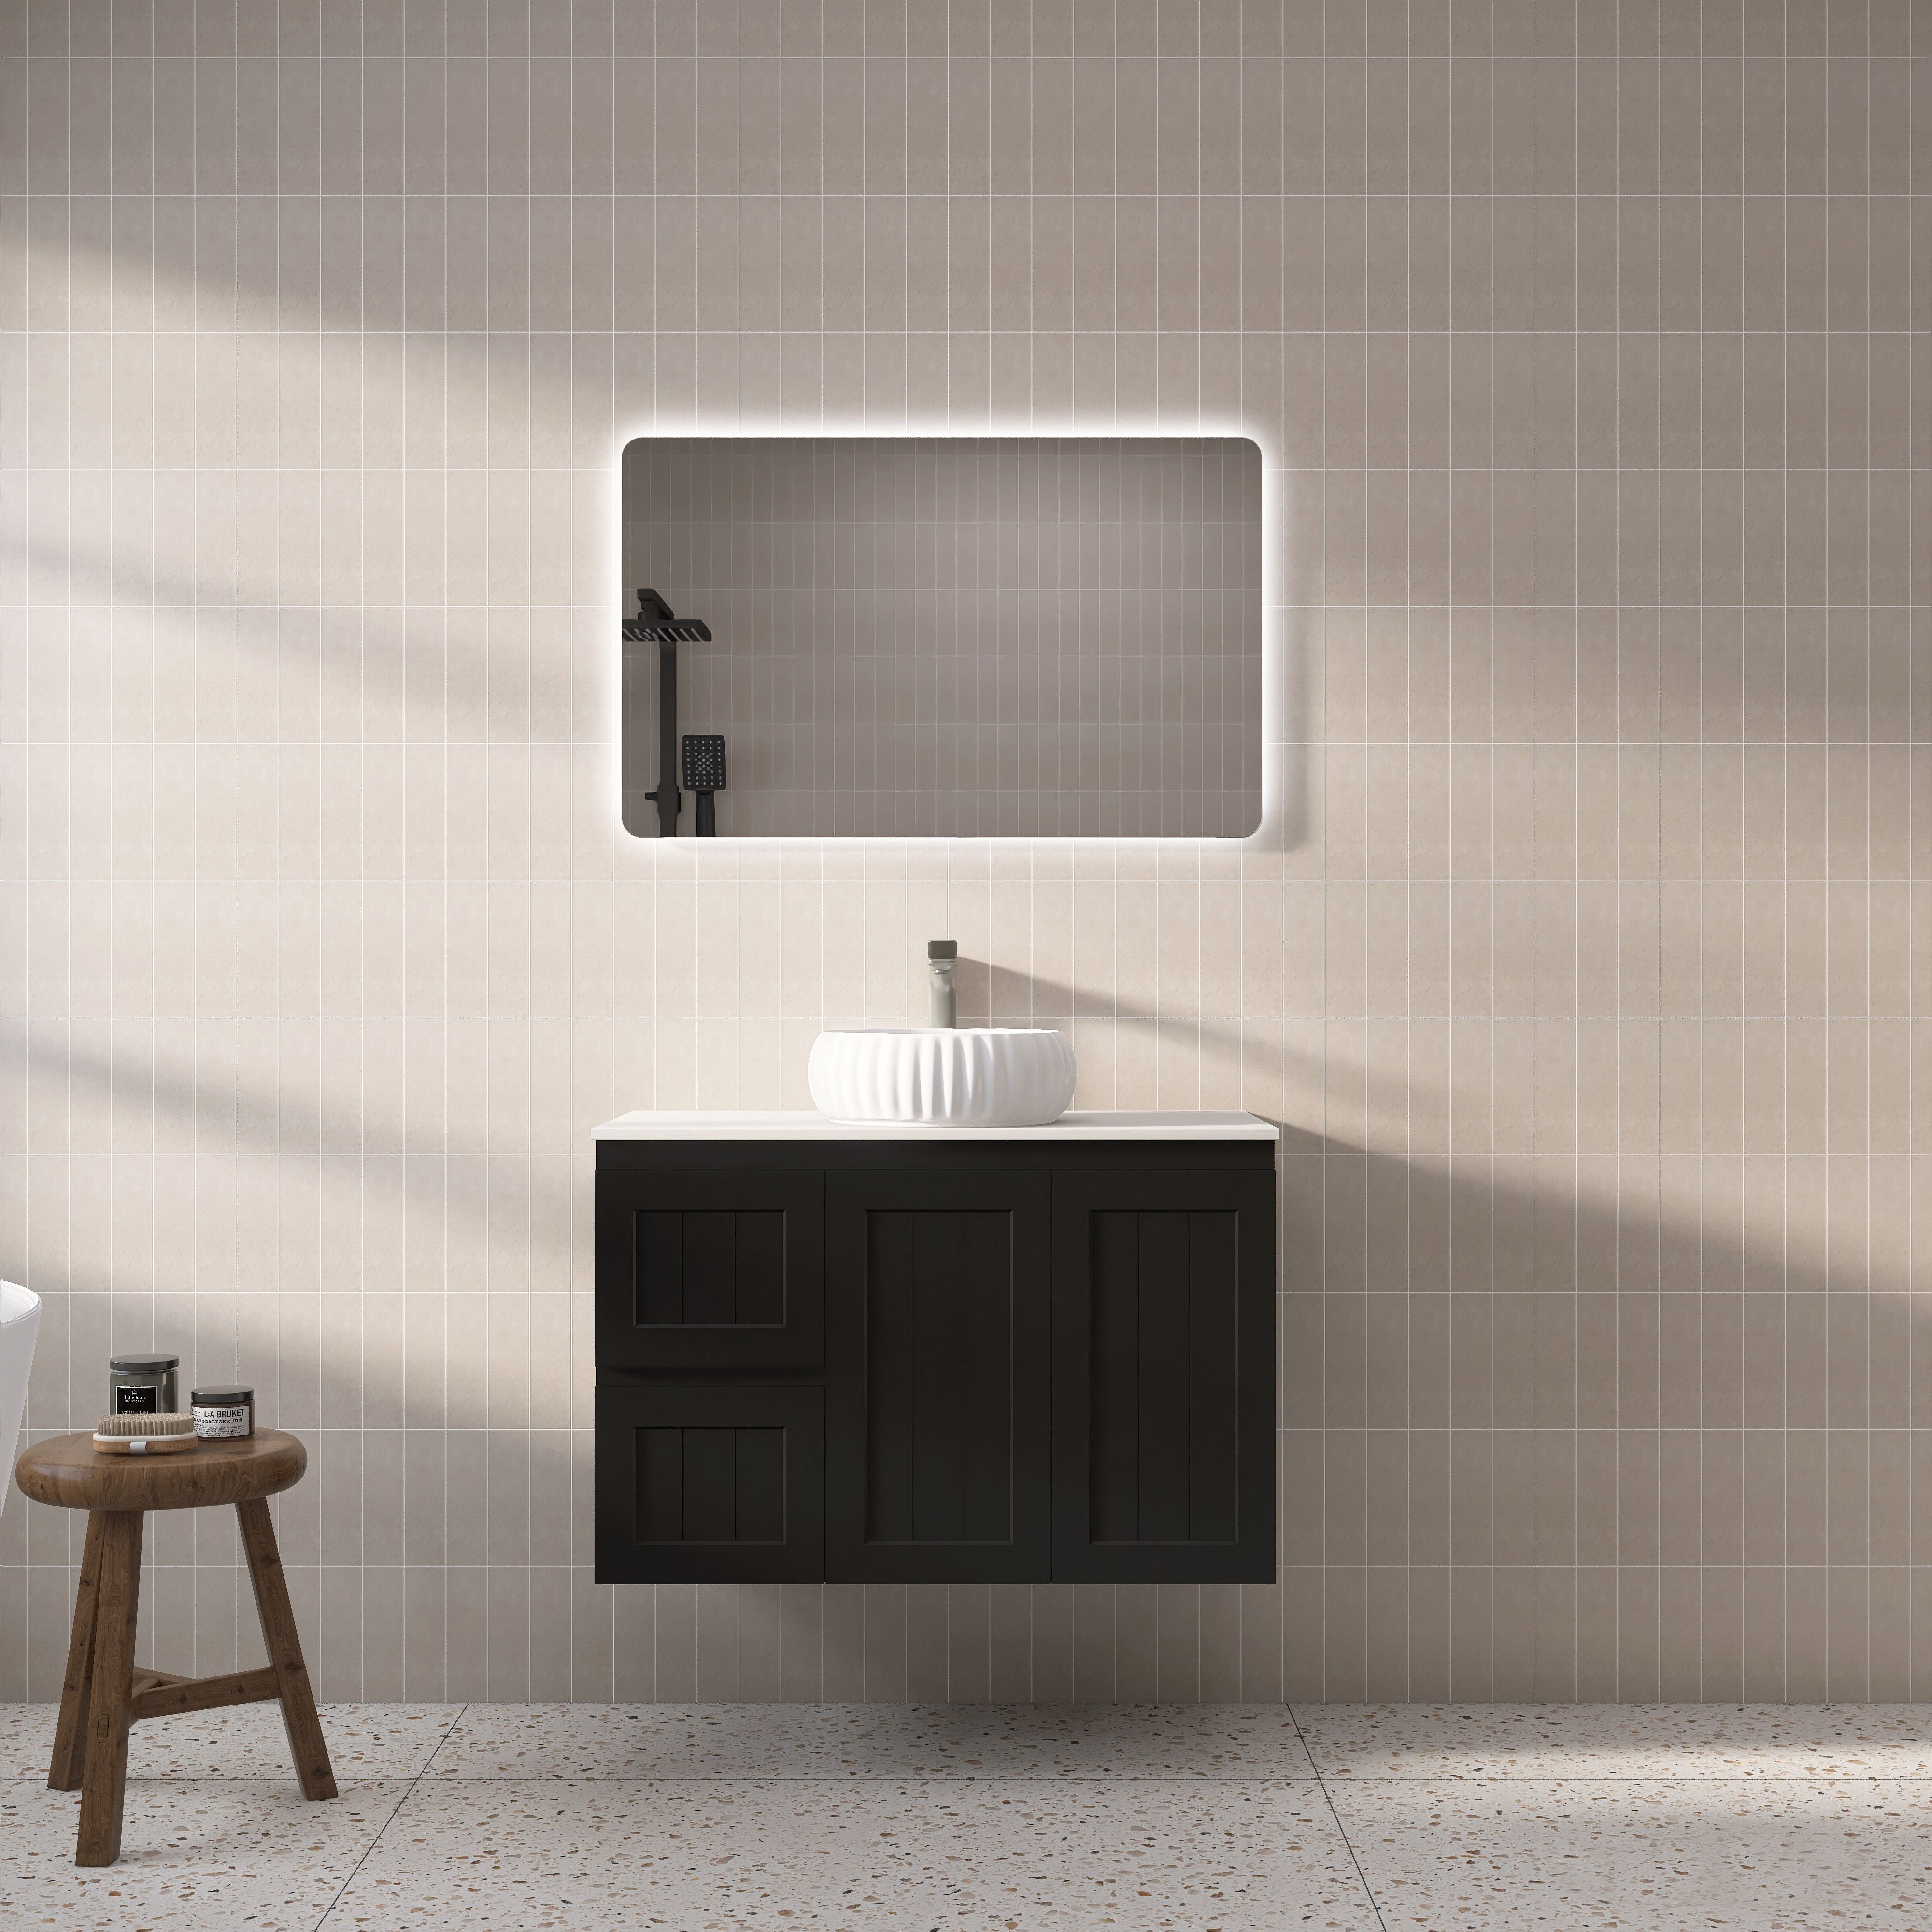 POSEIDON ACACIA SHAKER MATTE BLACK 900MM WALL HUNG VANITY (AVAILABLE IN LEFT HAND DRAWER AND RIGHT HAND DRAWER)